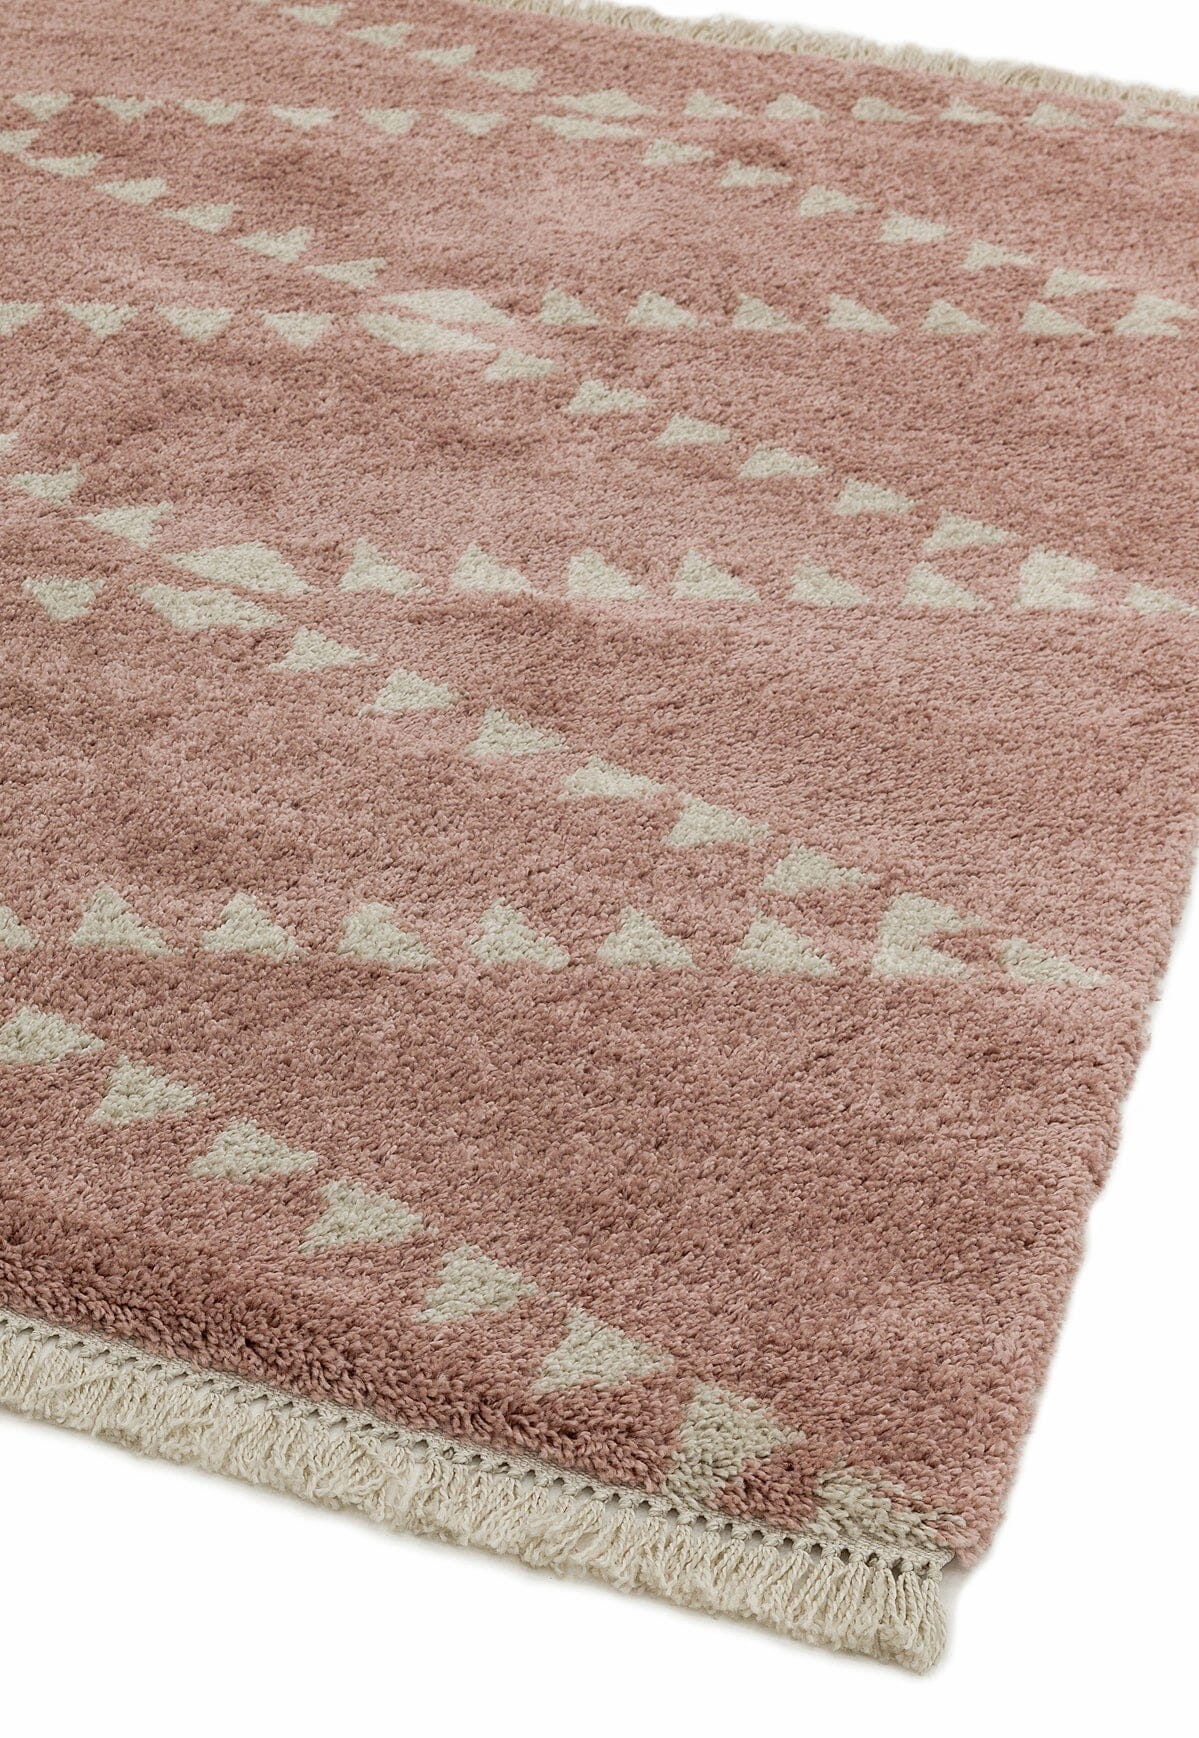  Asiatic Carpets-Asiatic Carpets Rocco Machine Woven Rug PINK - 160 x 230cm-Pink 541 